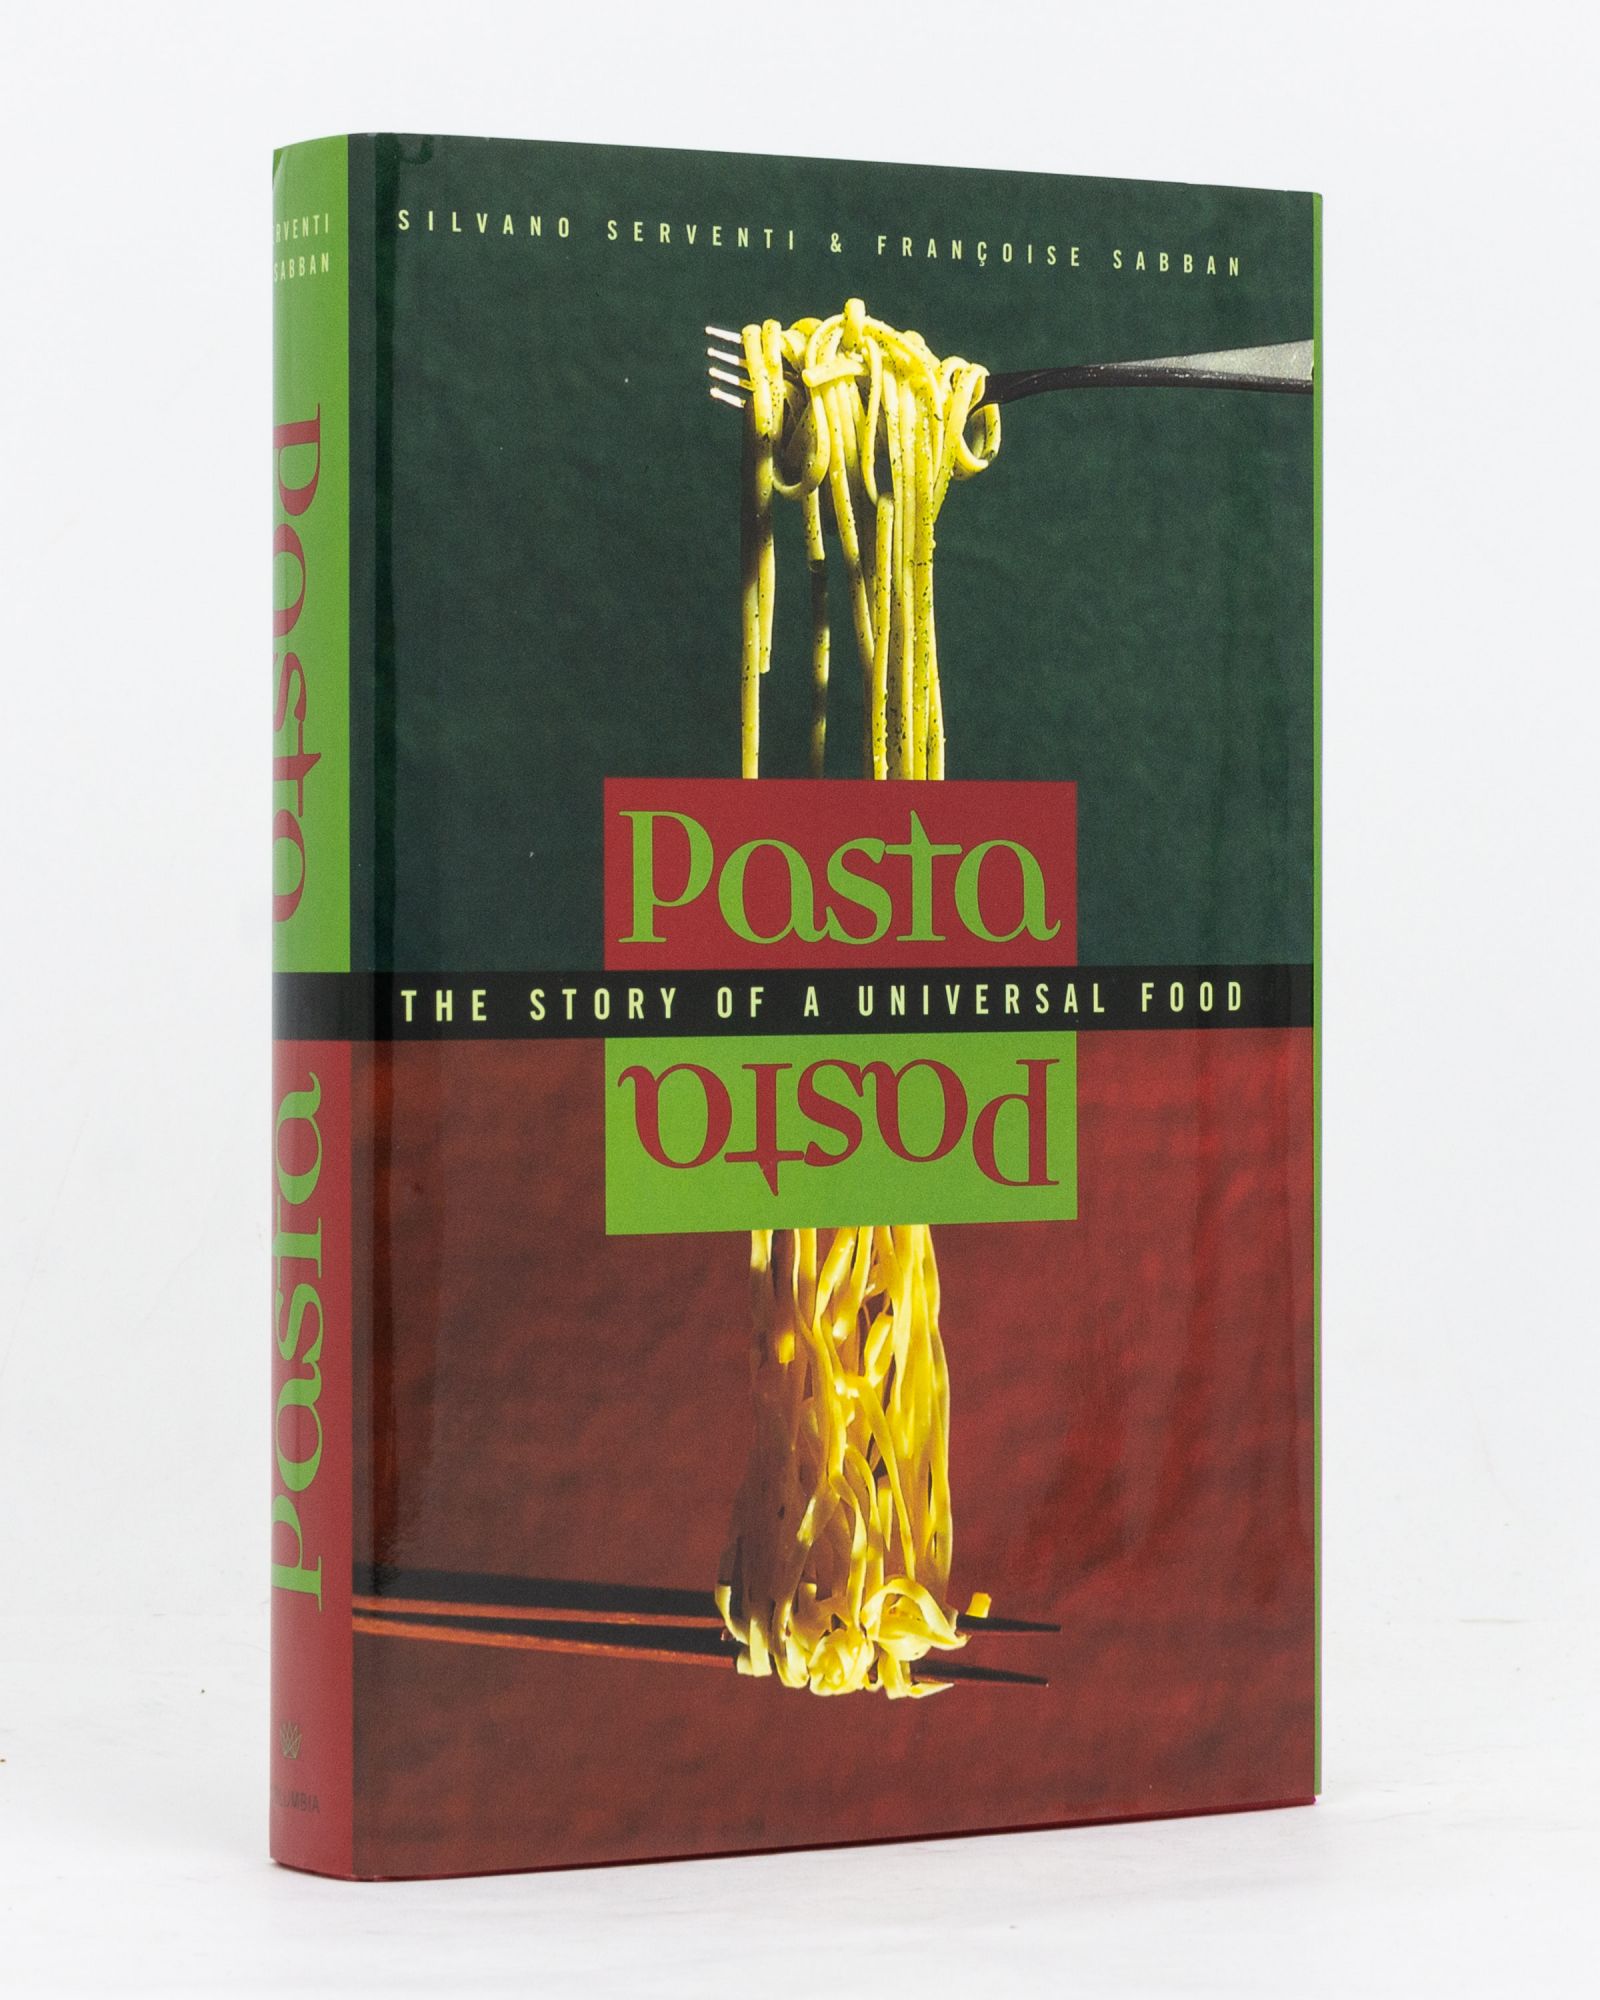 Pasta. The Story of a Universal Food - SERVENTI, Silvano and Francoise SABBAN